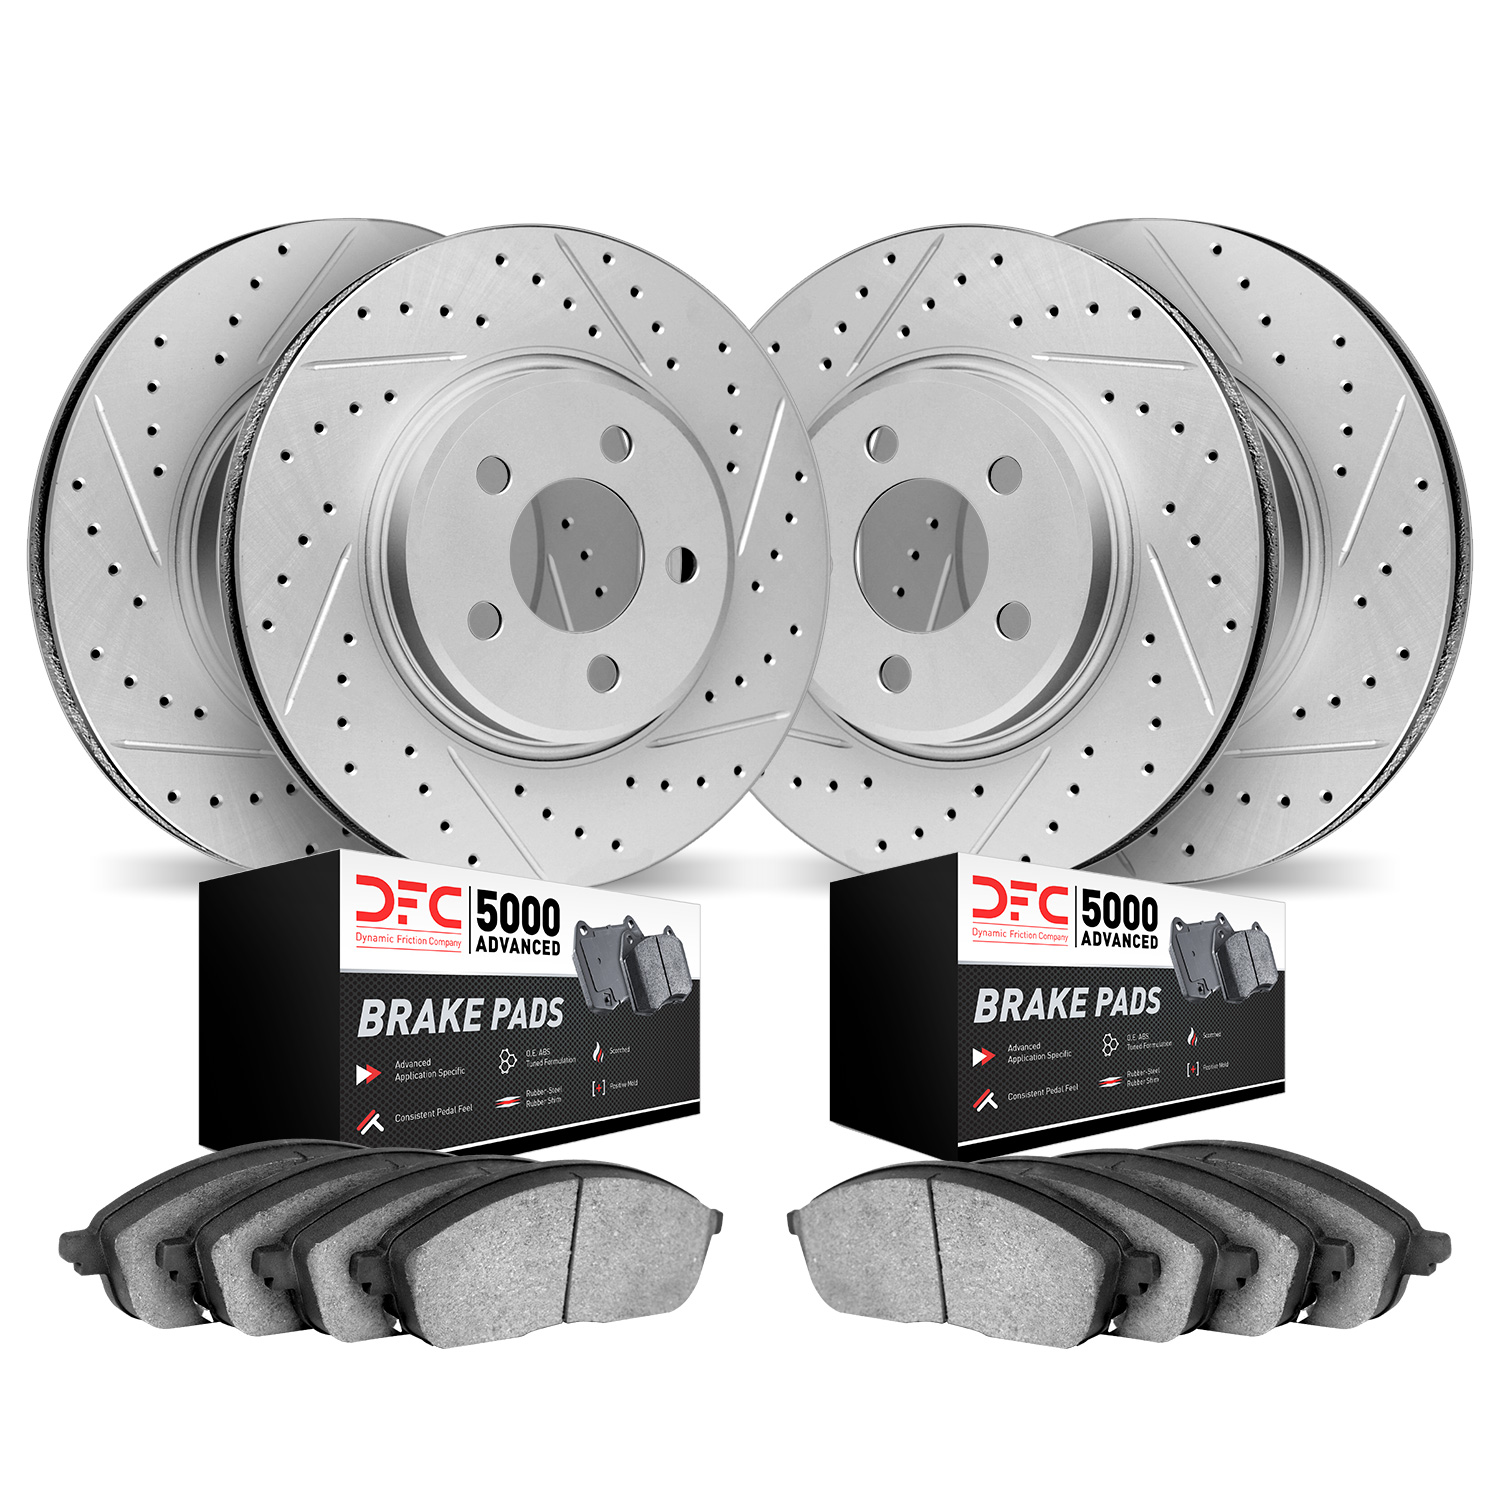 2504-20008 Geoperformance Drilled/Slotted Rotors w/5000 Advanced Brake Pads Kit, 2003-2005 Jaguar, Position: Front and Rear